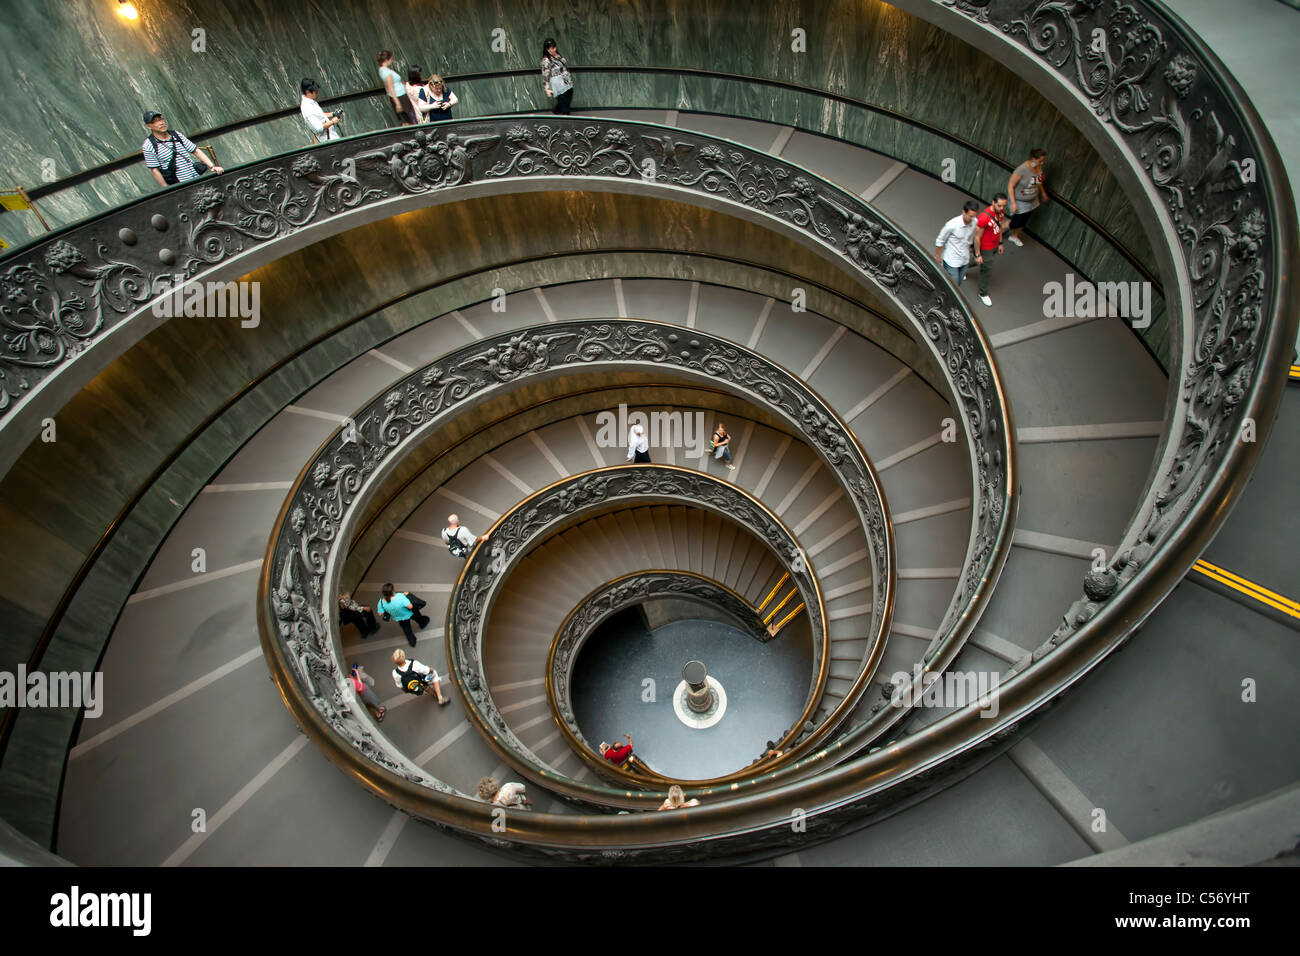 Vatican museum famous spiral ramp from upper floors to ground level, top to bottom. Double spiral walkway for tourists. Stock Photo